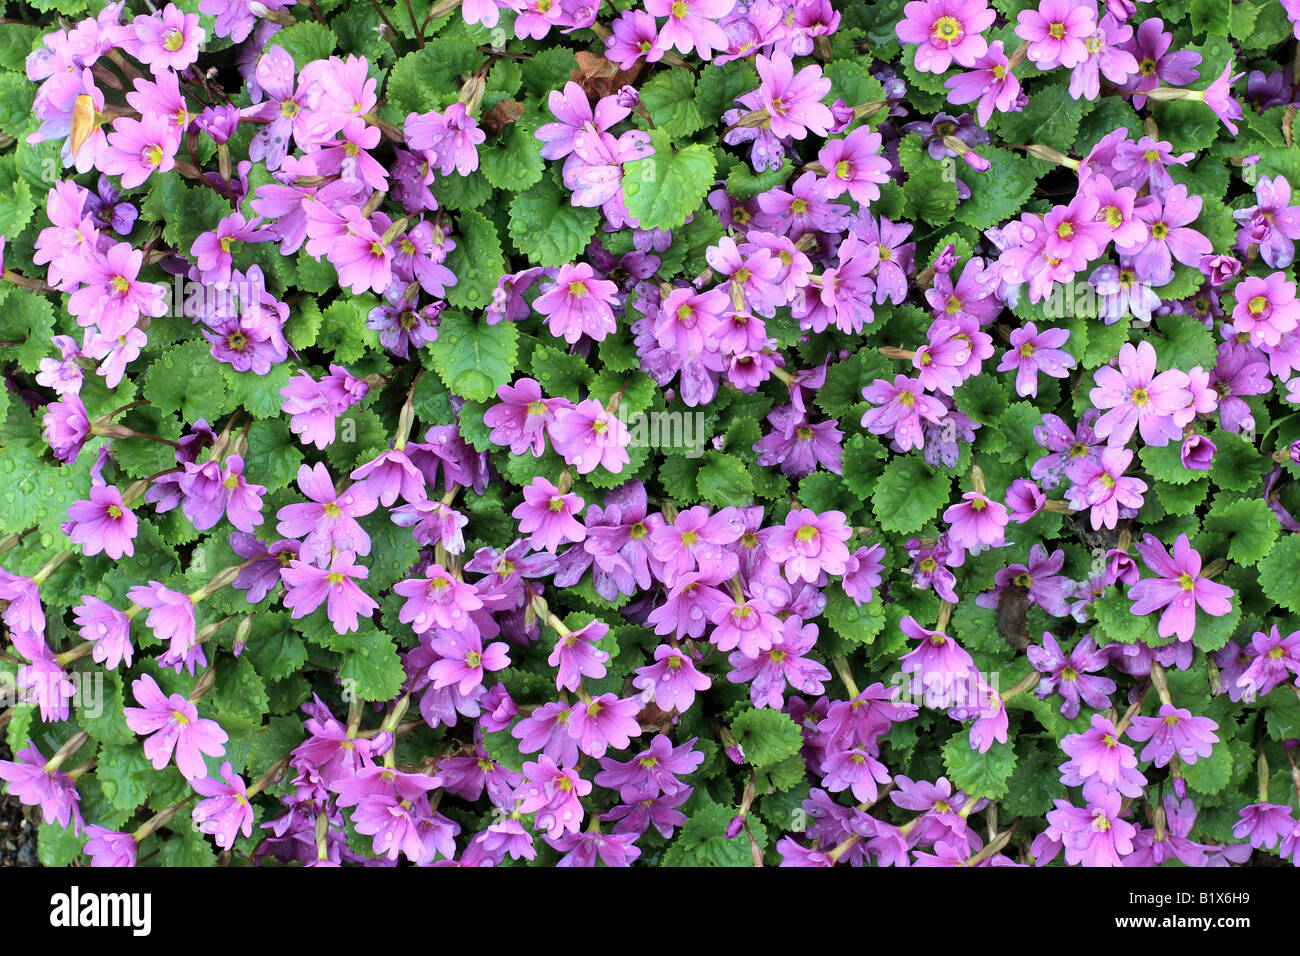 A bunch of pink flowers growing on a small shrub Intense colour gives almost painterly effect natural colors and light Stock Photo